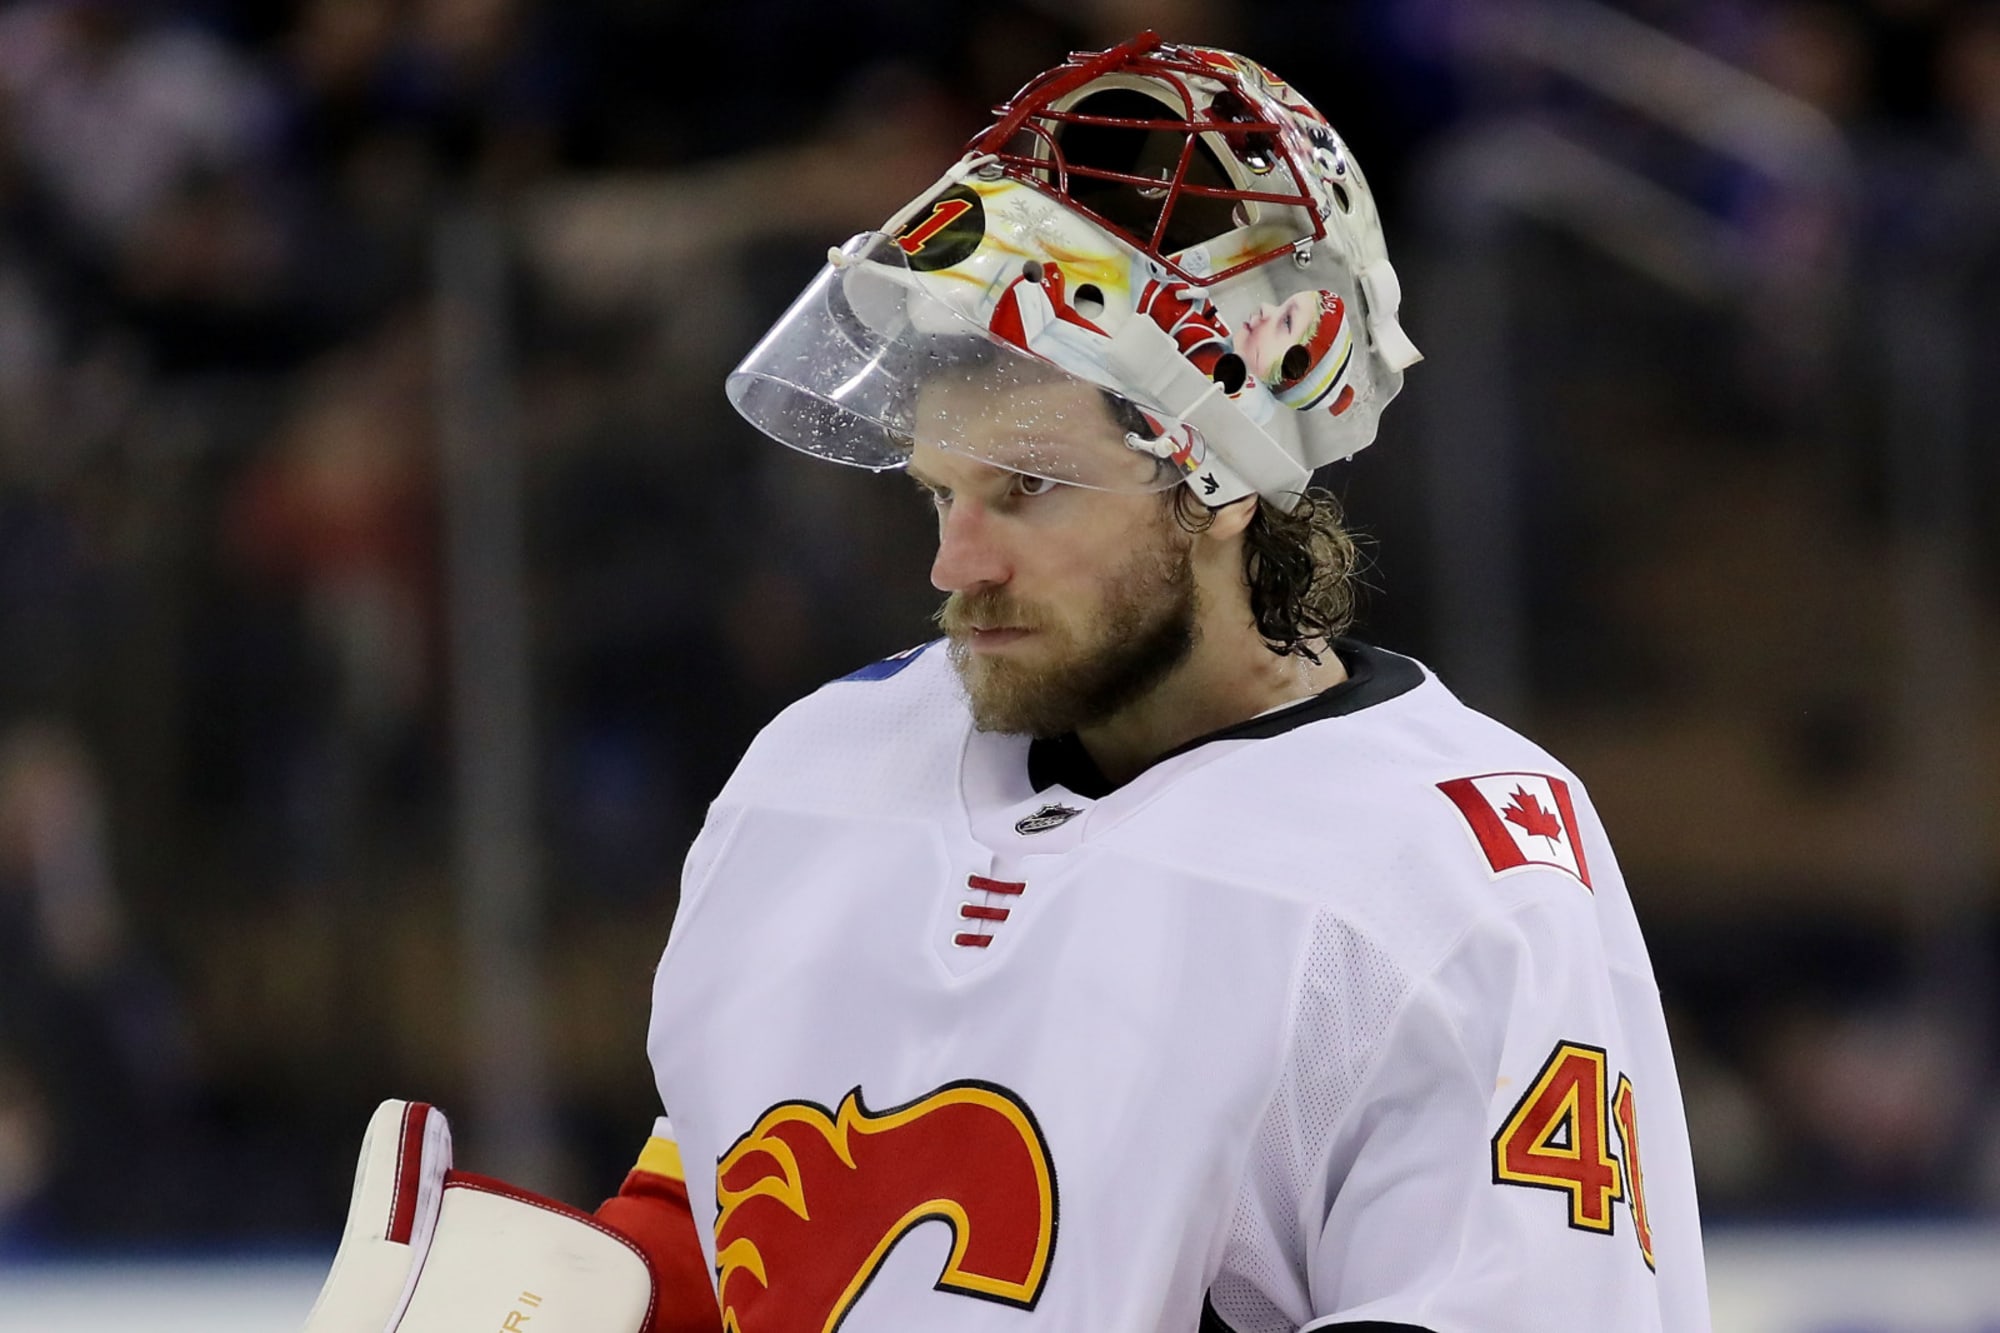 The link between Kiprusoff and the lack of goalies in minor hockey